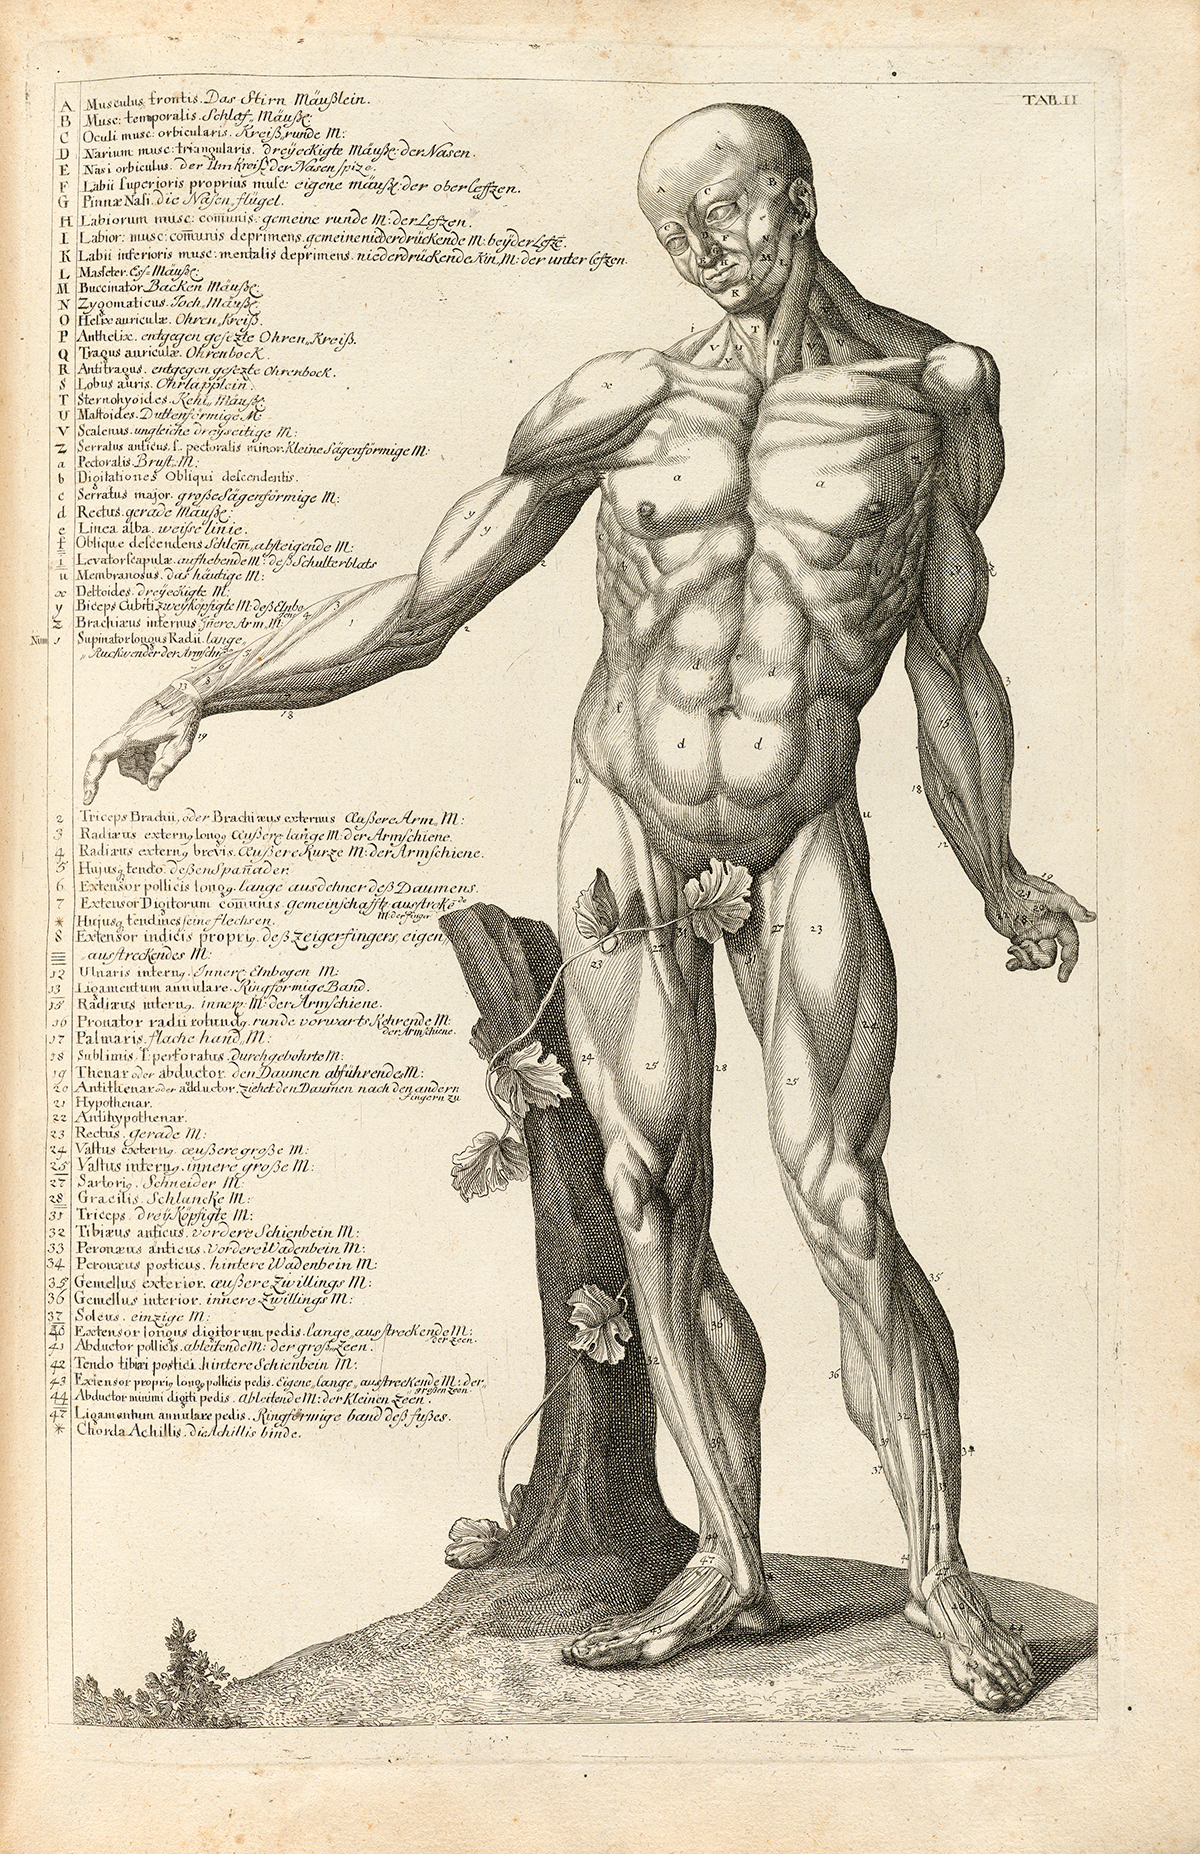 Human Body front view with major muscles labeled